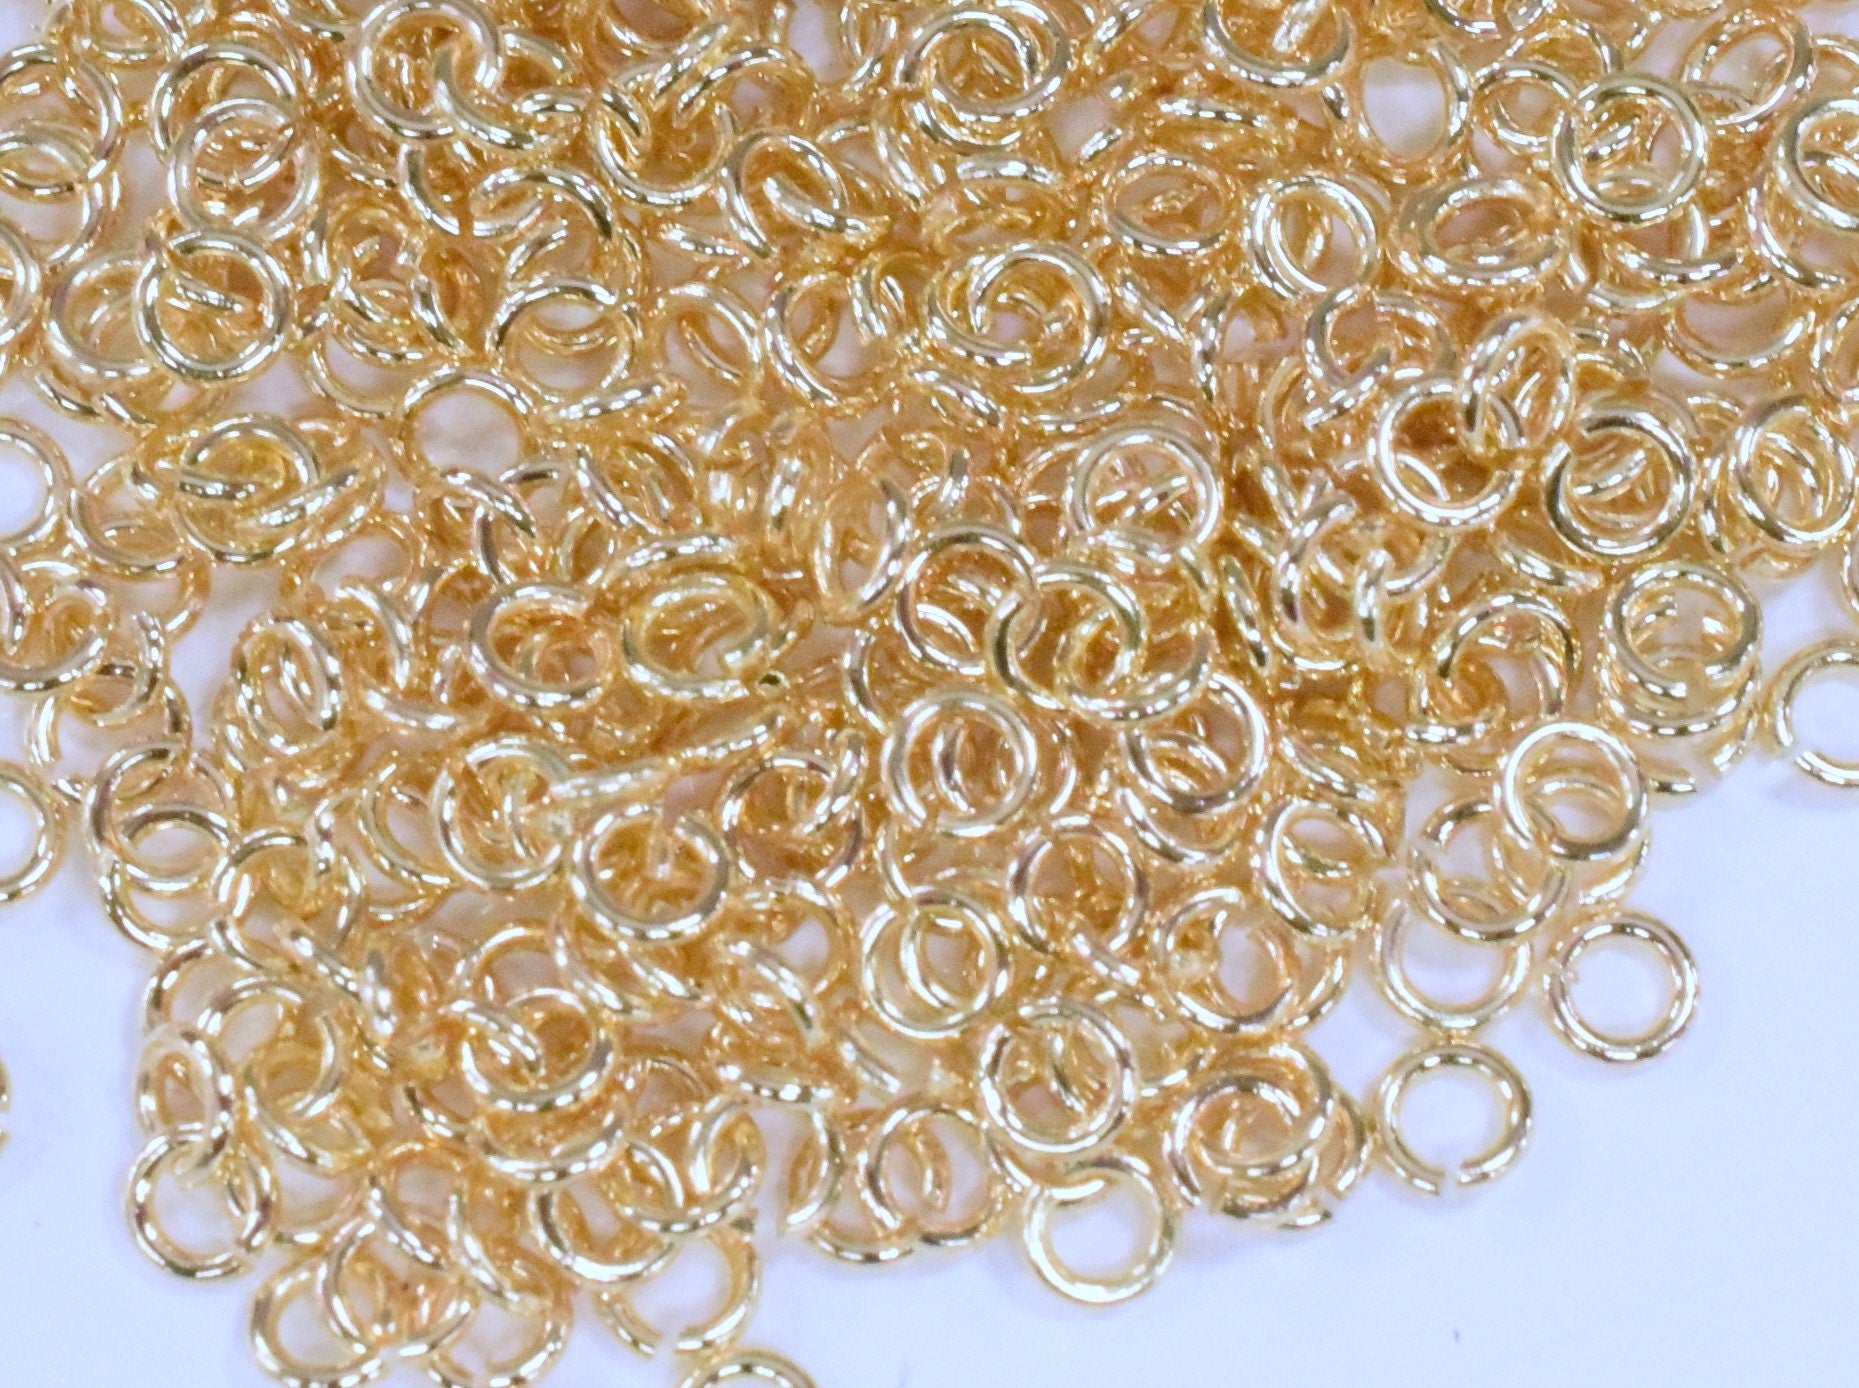 Gold Filled Jump Ring Size 3mm, 4mm, 5mm, Wholesale Jewelry Making Supplies